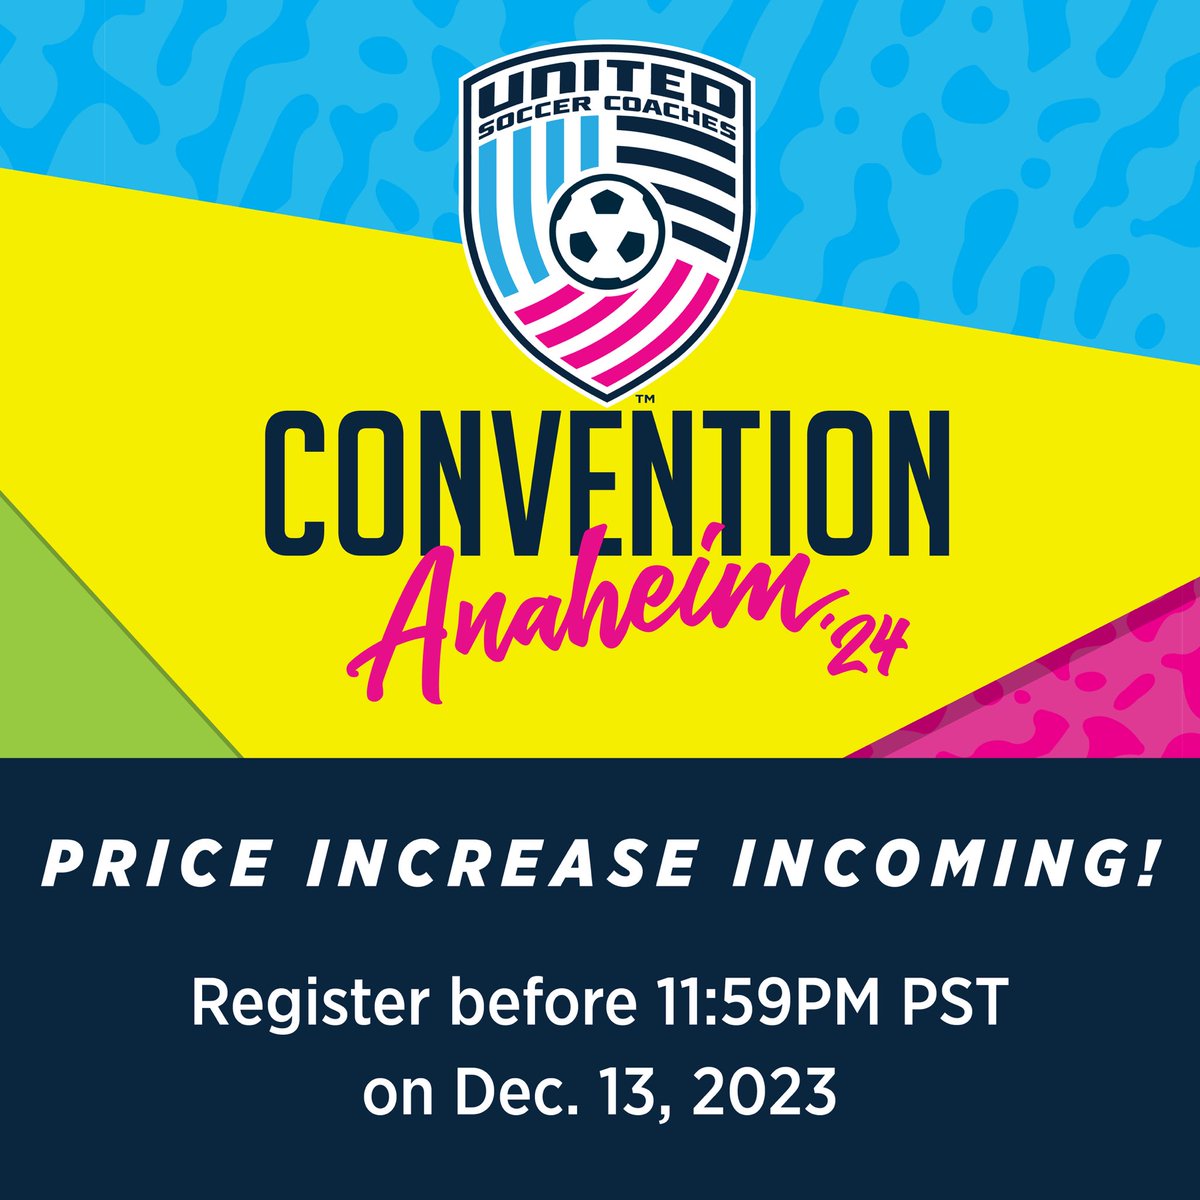 The leading soccer education event of the year is headed back to the West Coast! Learn, reconnect, and network with thousands of coaches and advocates of the game from around the globe! 🌴⚽ #StrongerUnited24 January 10-14 at the Anaheim Convention Center. @visitanaheim…